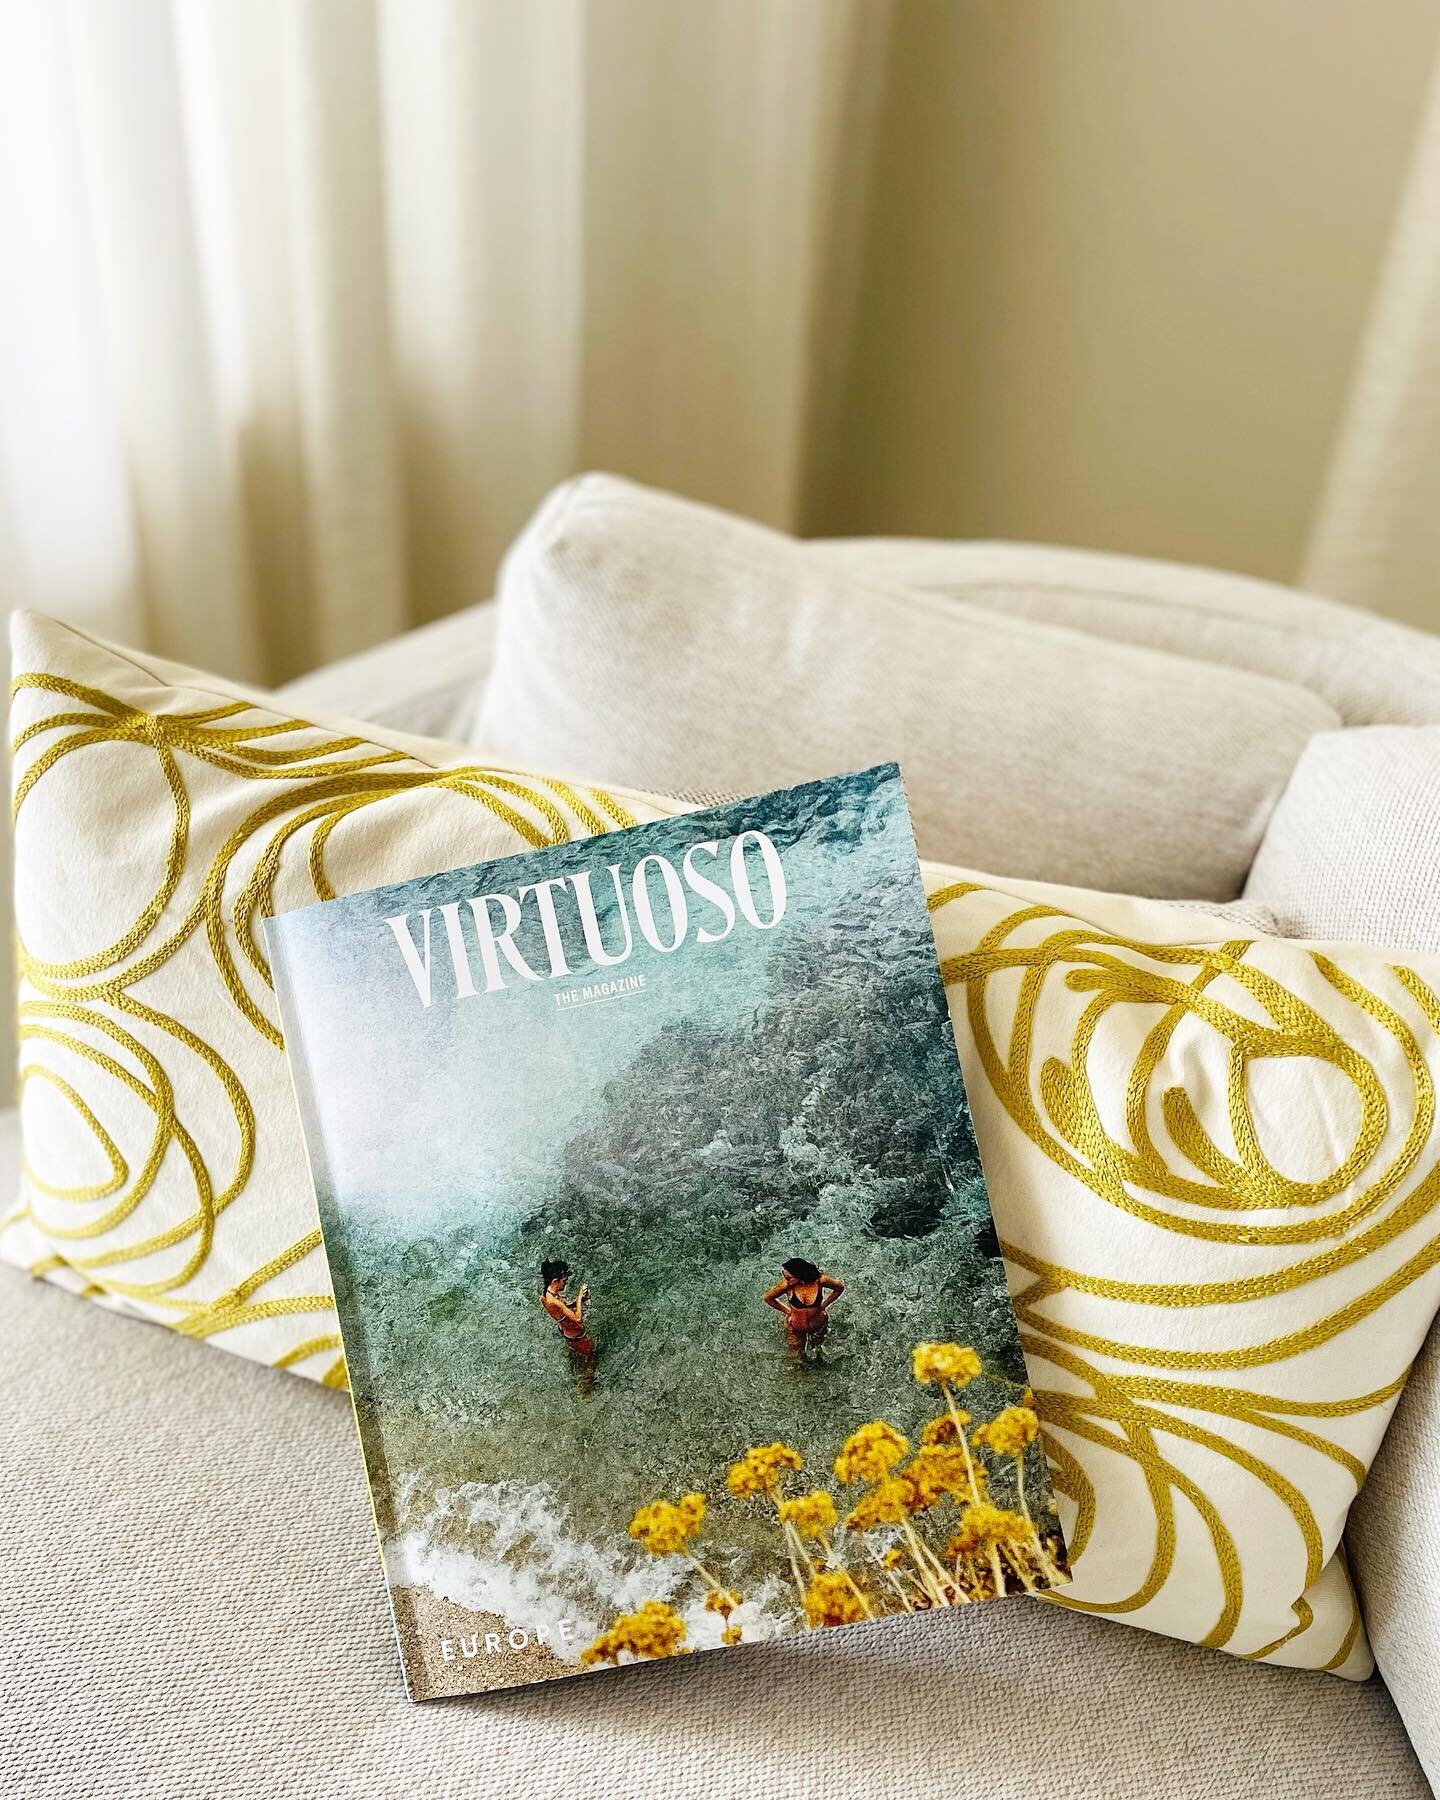 Hot off the press! 🔥Virtuoso Life magazine is the ultimate wanderlust inspiration. Our current clients are eligible for a complimentary subscription delivered every other month. 🔸 DM us to learn more and to put curated travel on your horizon. 🌎 #t